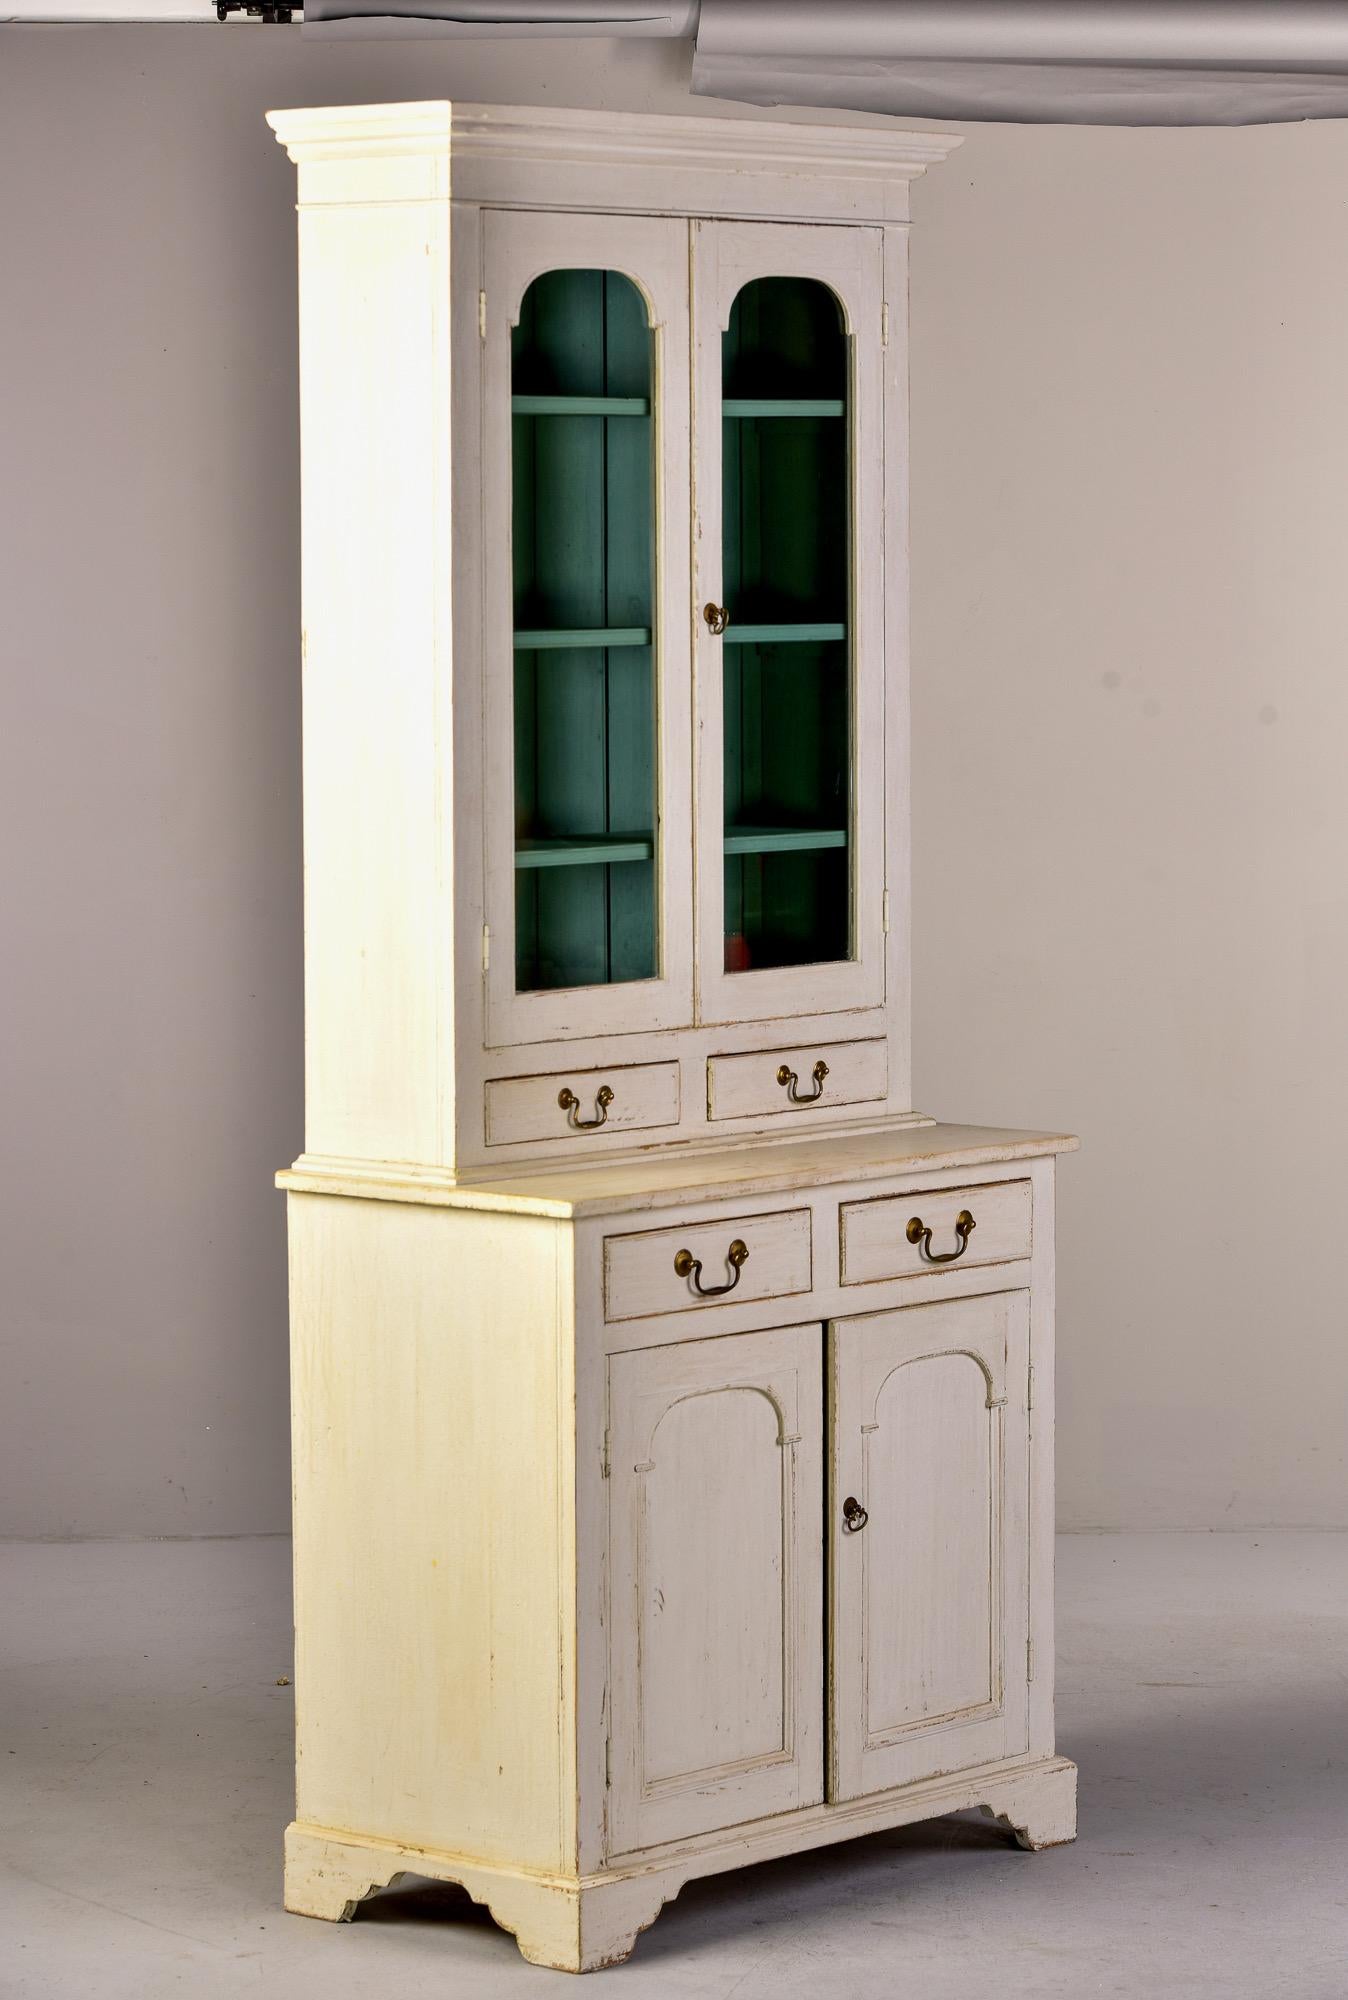 Small 19th C English Glazed Bookcase with White Paint and Blue Shelves 8